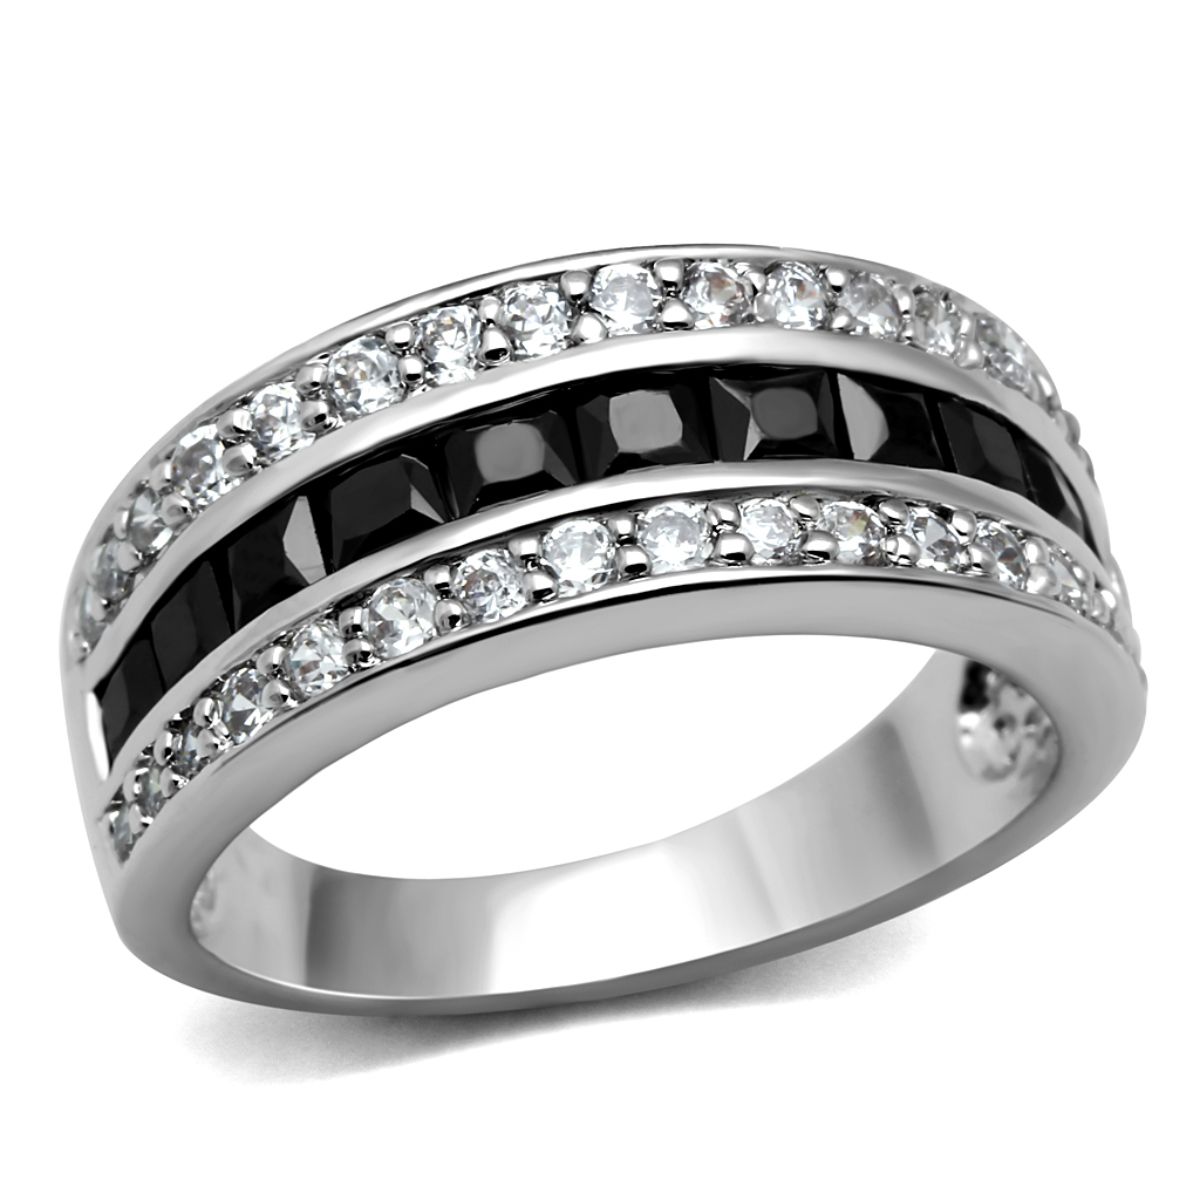 Luxe Jewelry Designs Women's Stainless Steel Pave Ring with Black Diamond Cubic Zirconia, Size 8